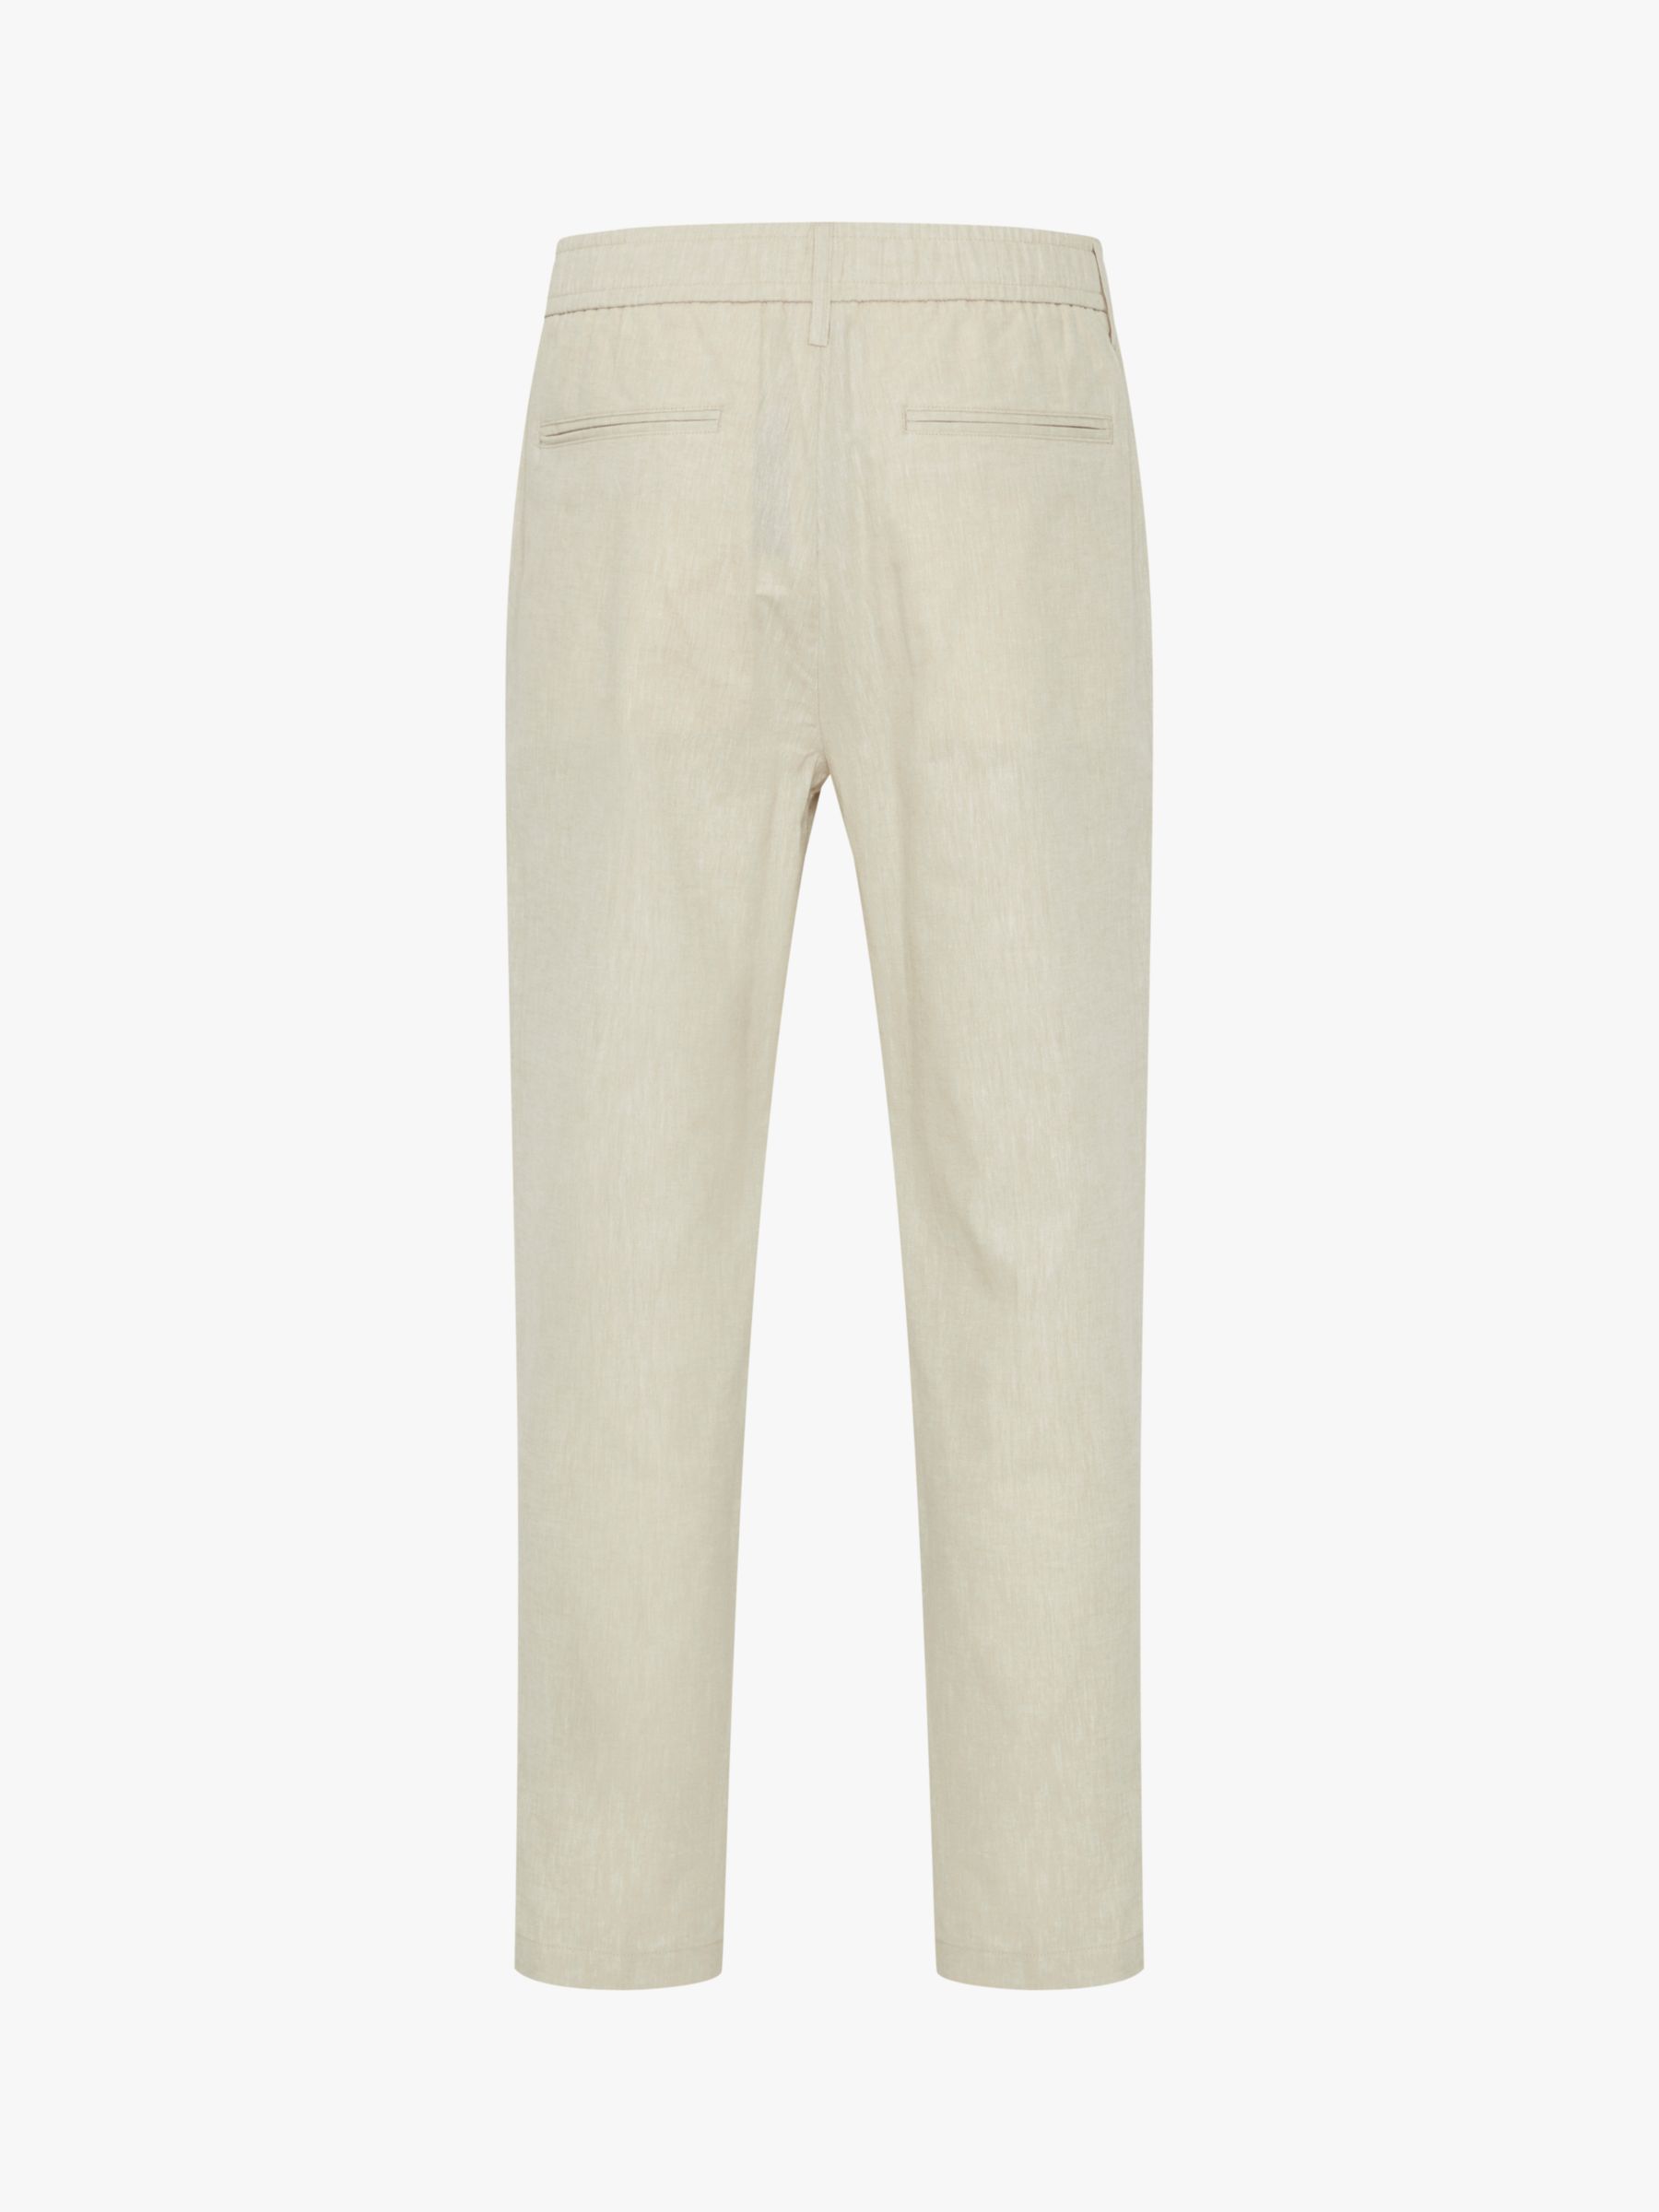 Casual Friday Marc Relaxed Fit Pleated Linen Trousers, Chateau Gray Melange, 28R